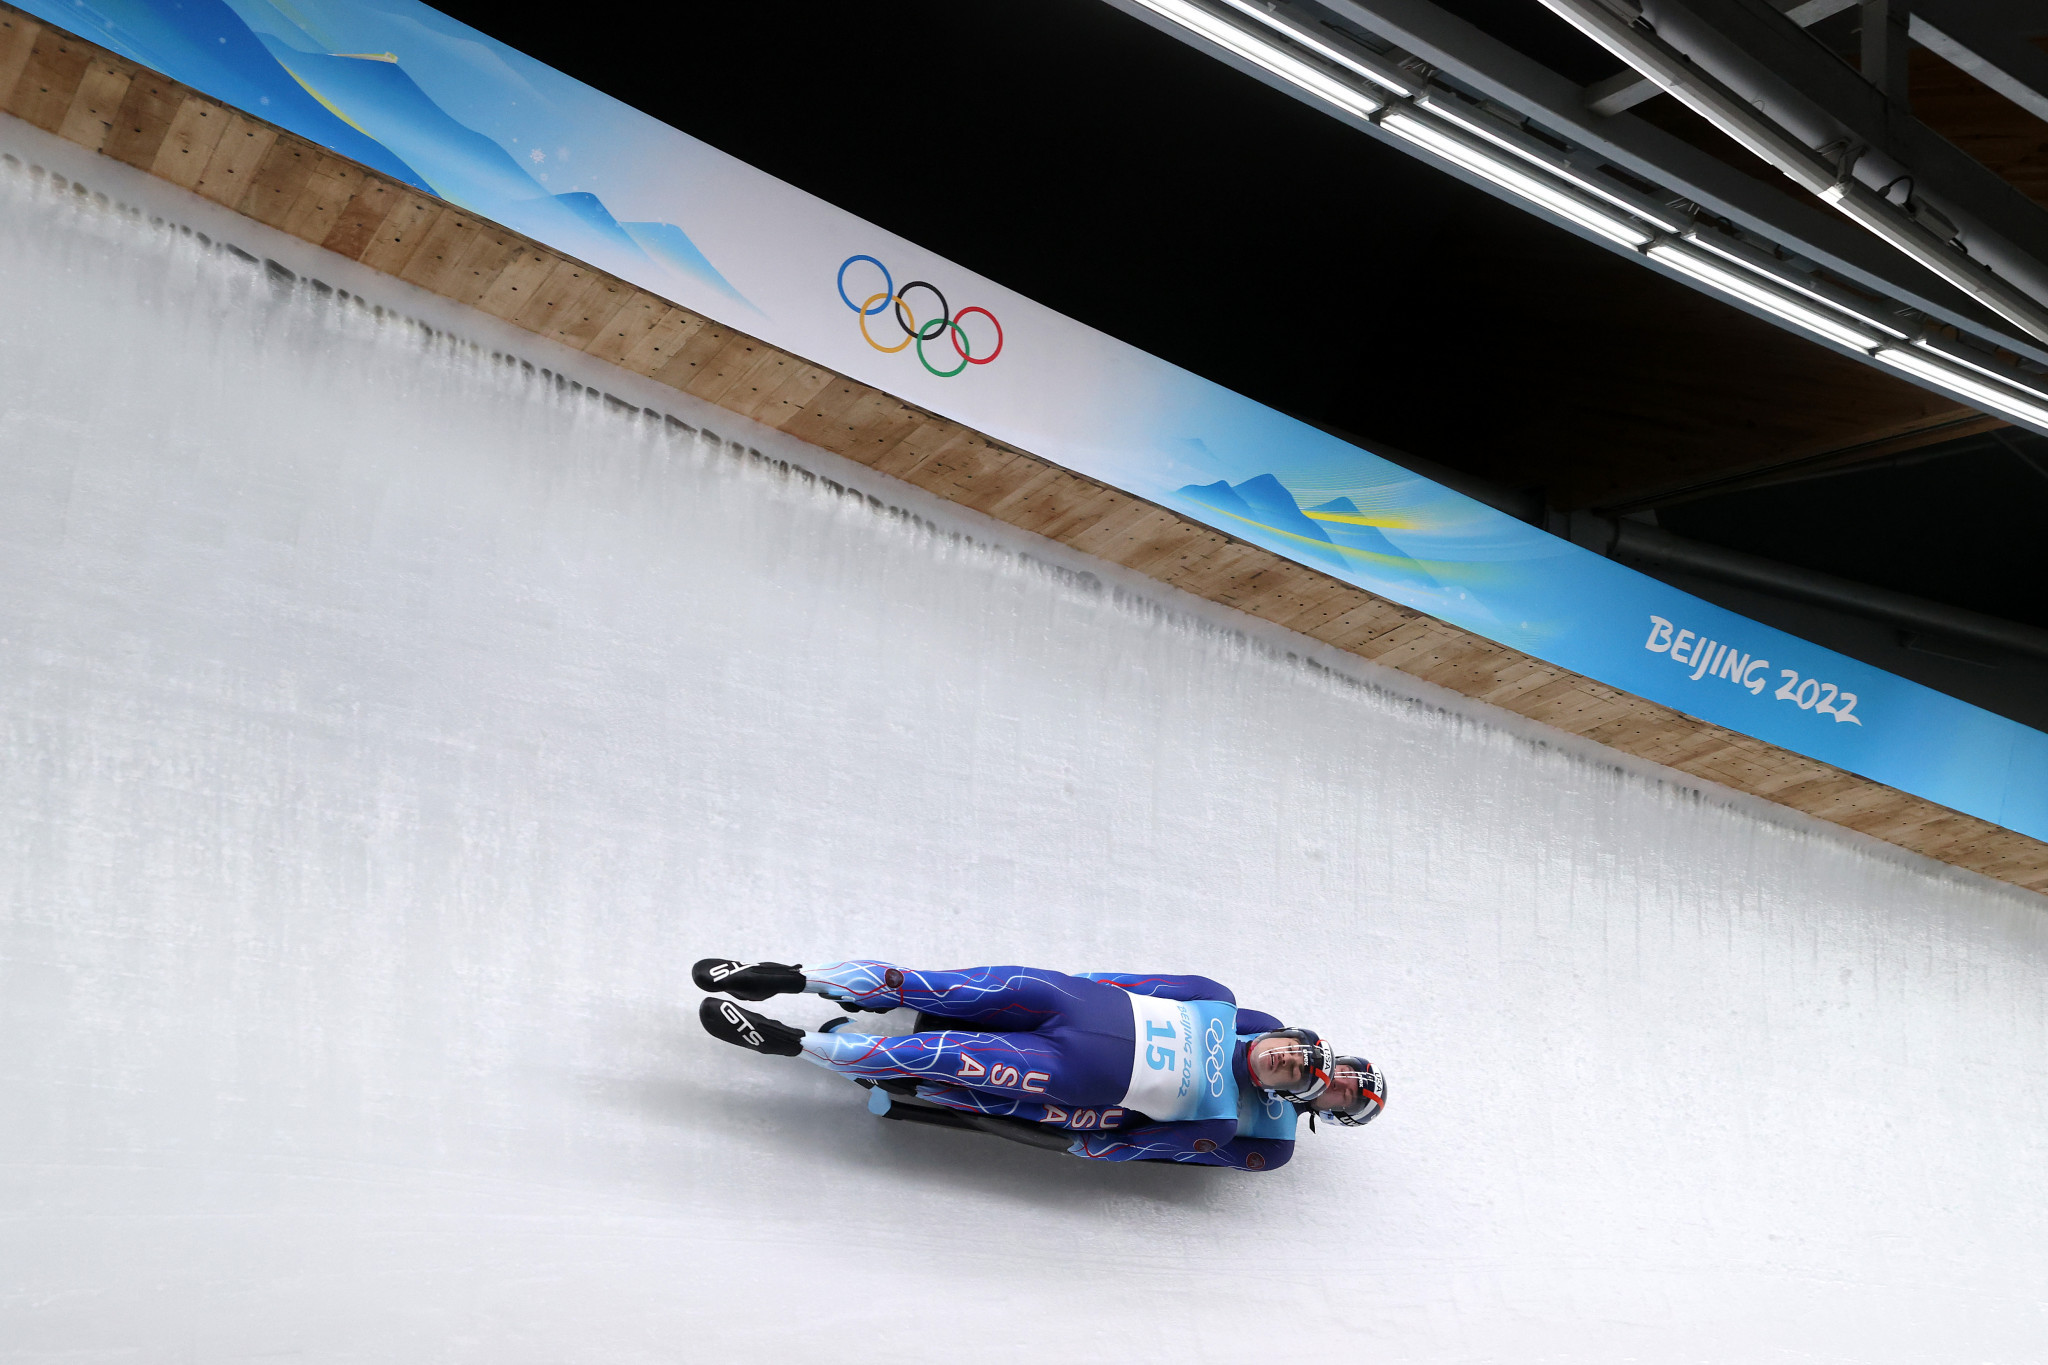 USA Luge were represented by eight athletes at Beijing 2022 but missed out on the medals ©Getty Images